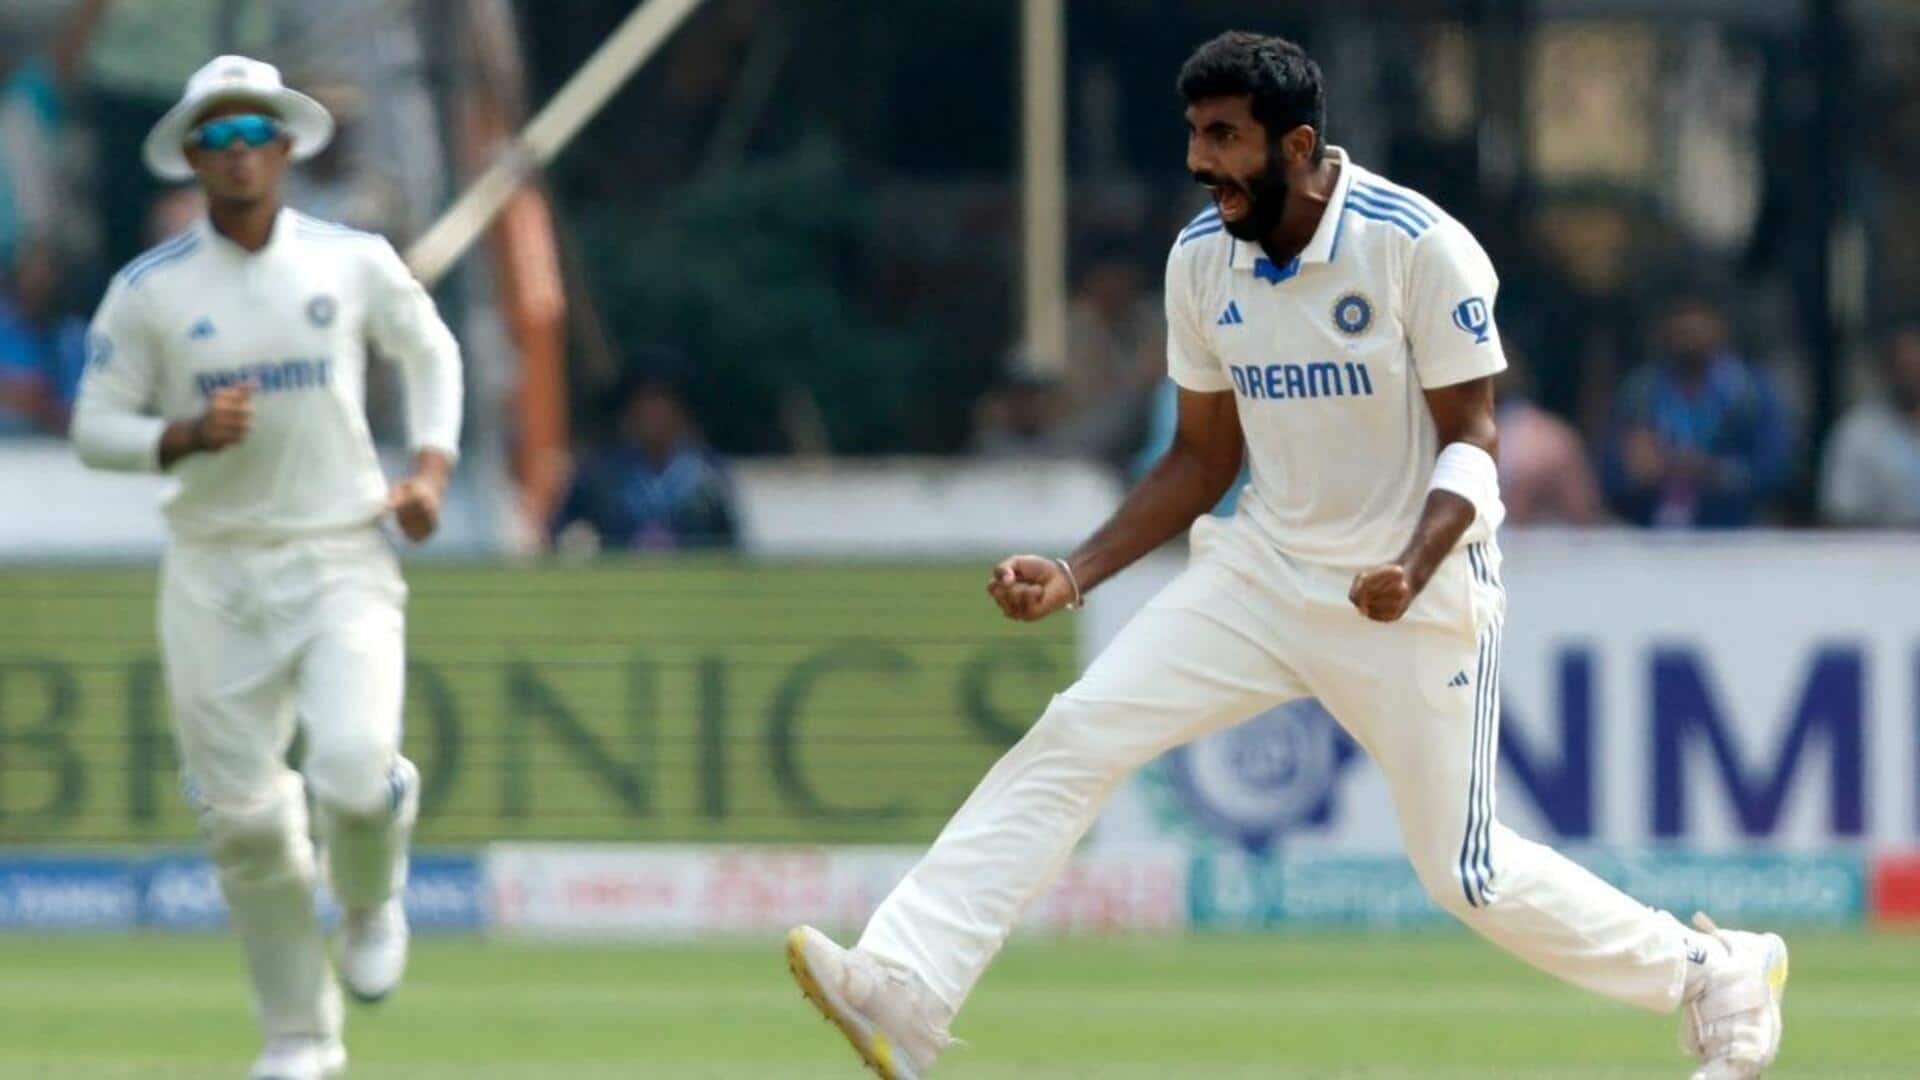 Jasprit Bumrah averages 14.40 in India: His stats across countries 